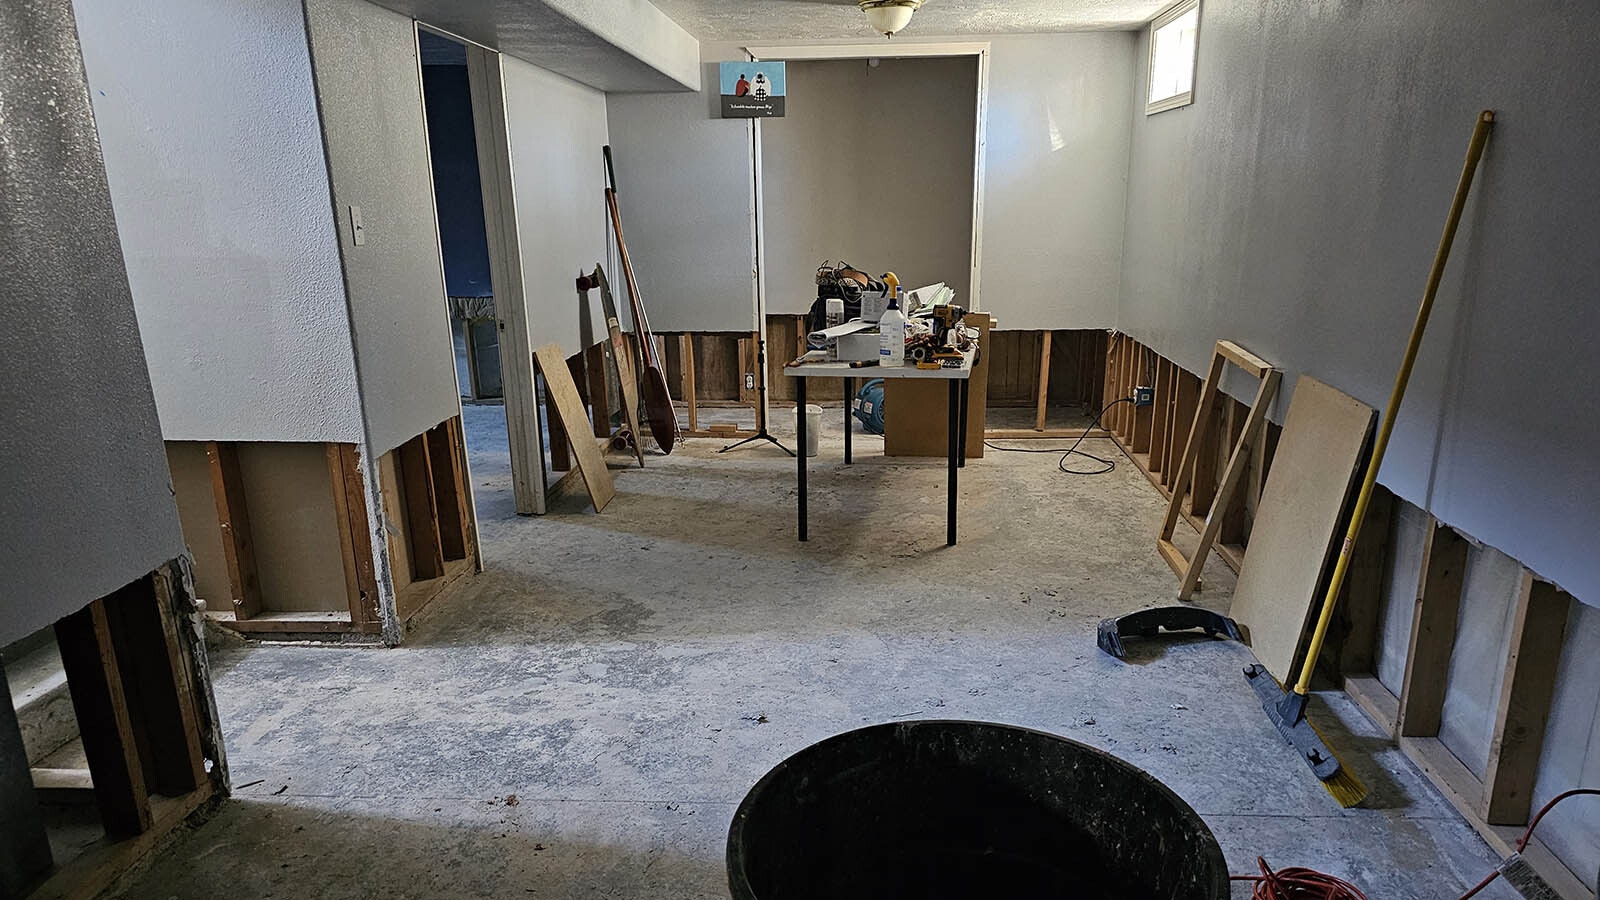 What used to be a finished basement is now a construction zone. Friends of the Rocha-Herandez family have volunteered to help the family as they work to try and save their basement after a 12-inch city water main busted and filled the basement up with 3 feet of water last week.